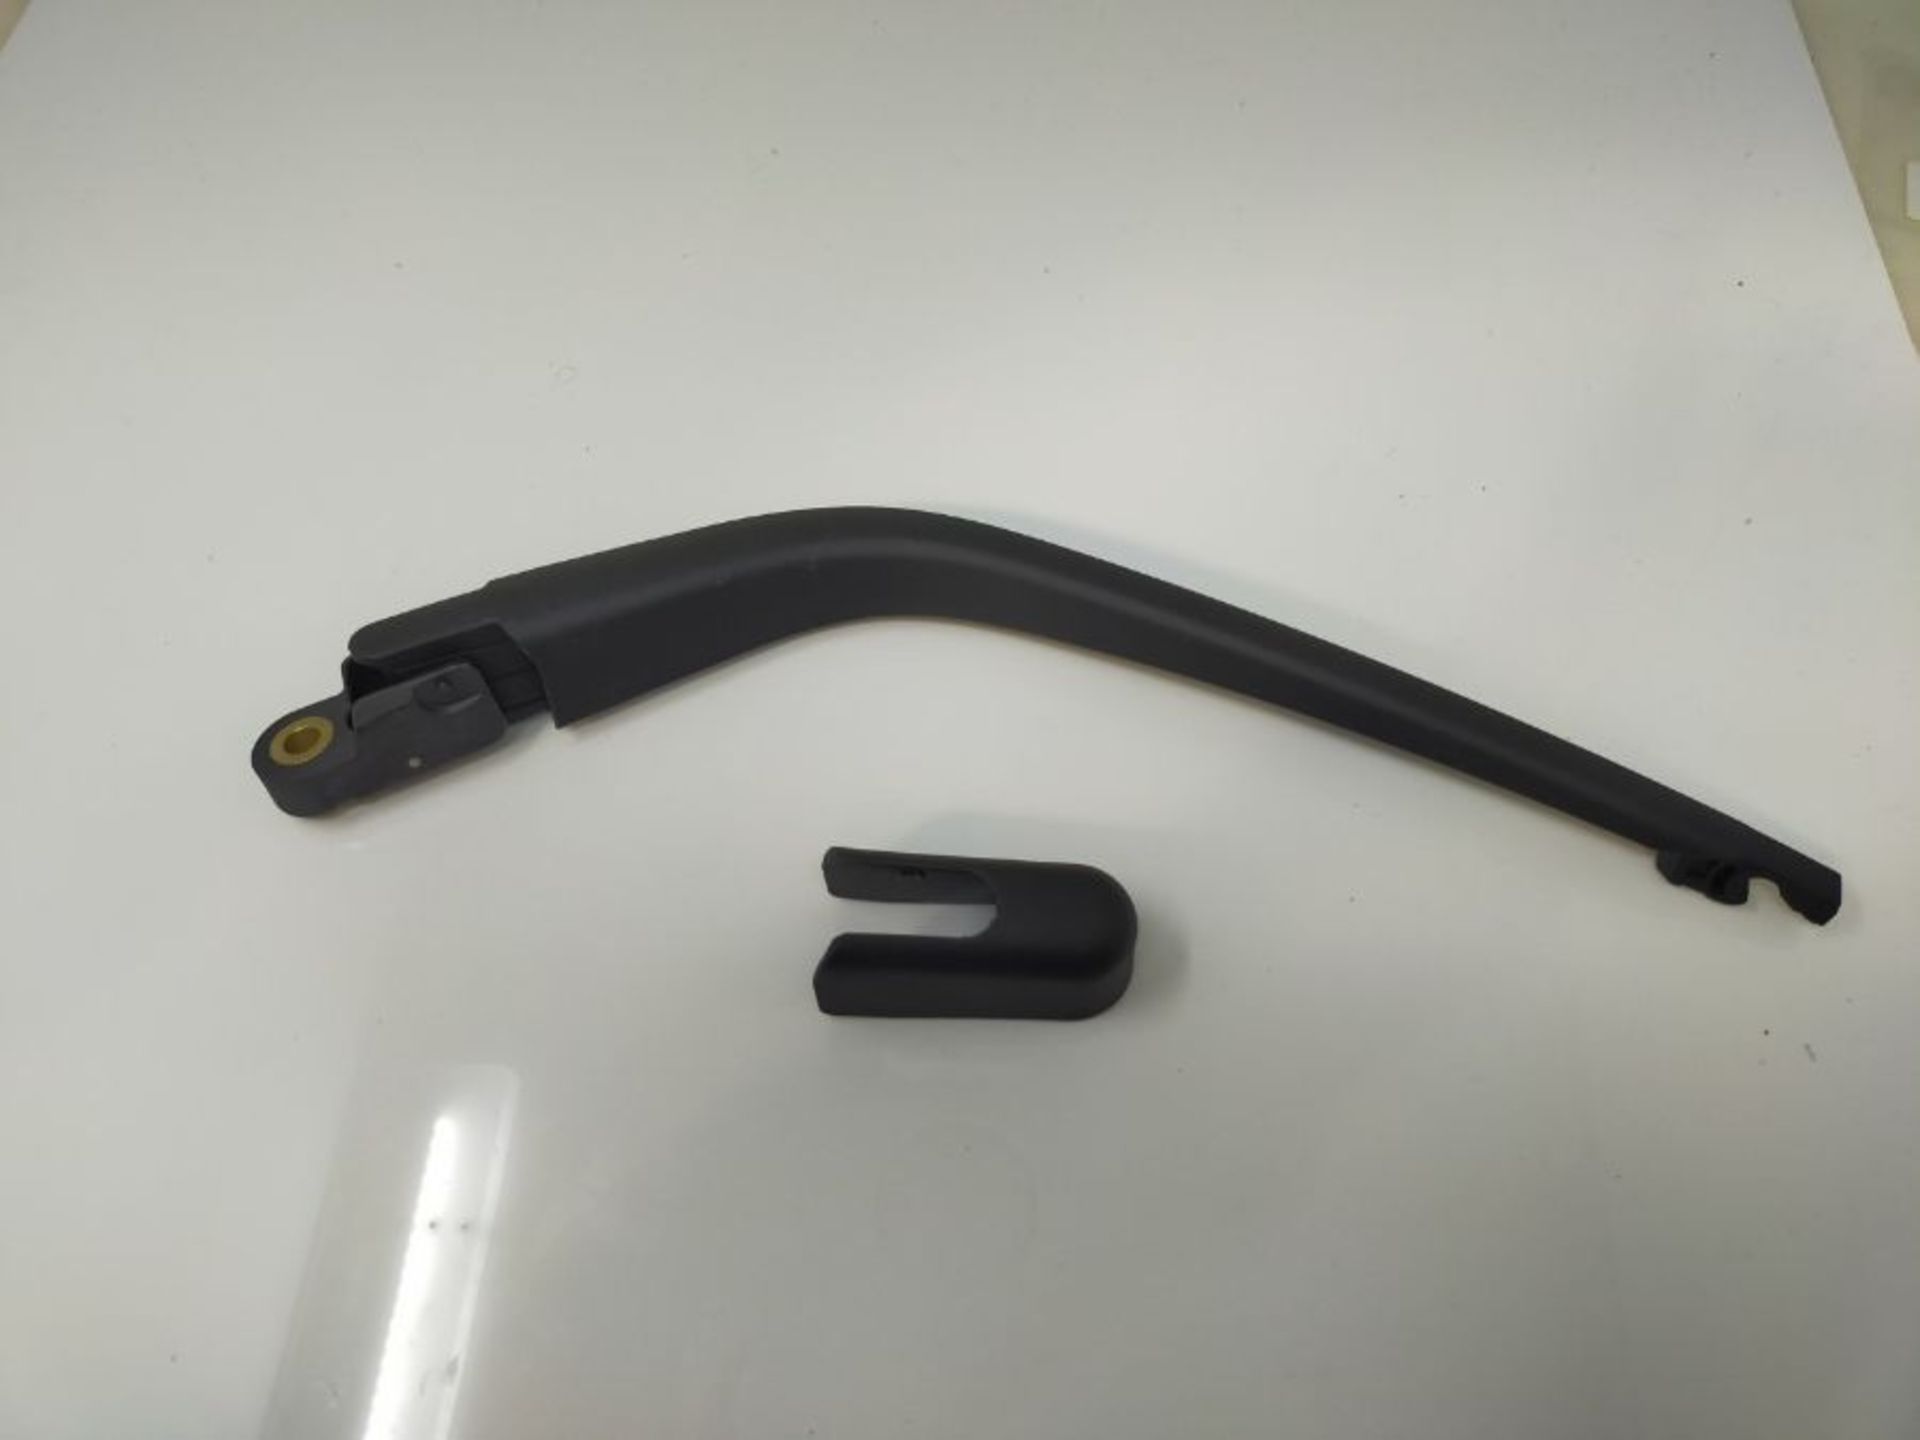 [INCOMPLETE] Rear Wiper Arm Blade, Replacement for Hyundai I10 2007-2013 - ZOFFI Back - Image 2 of 6